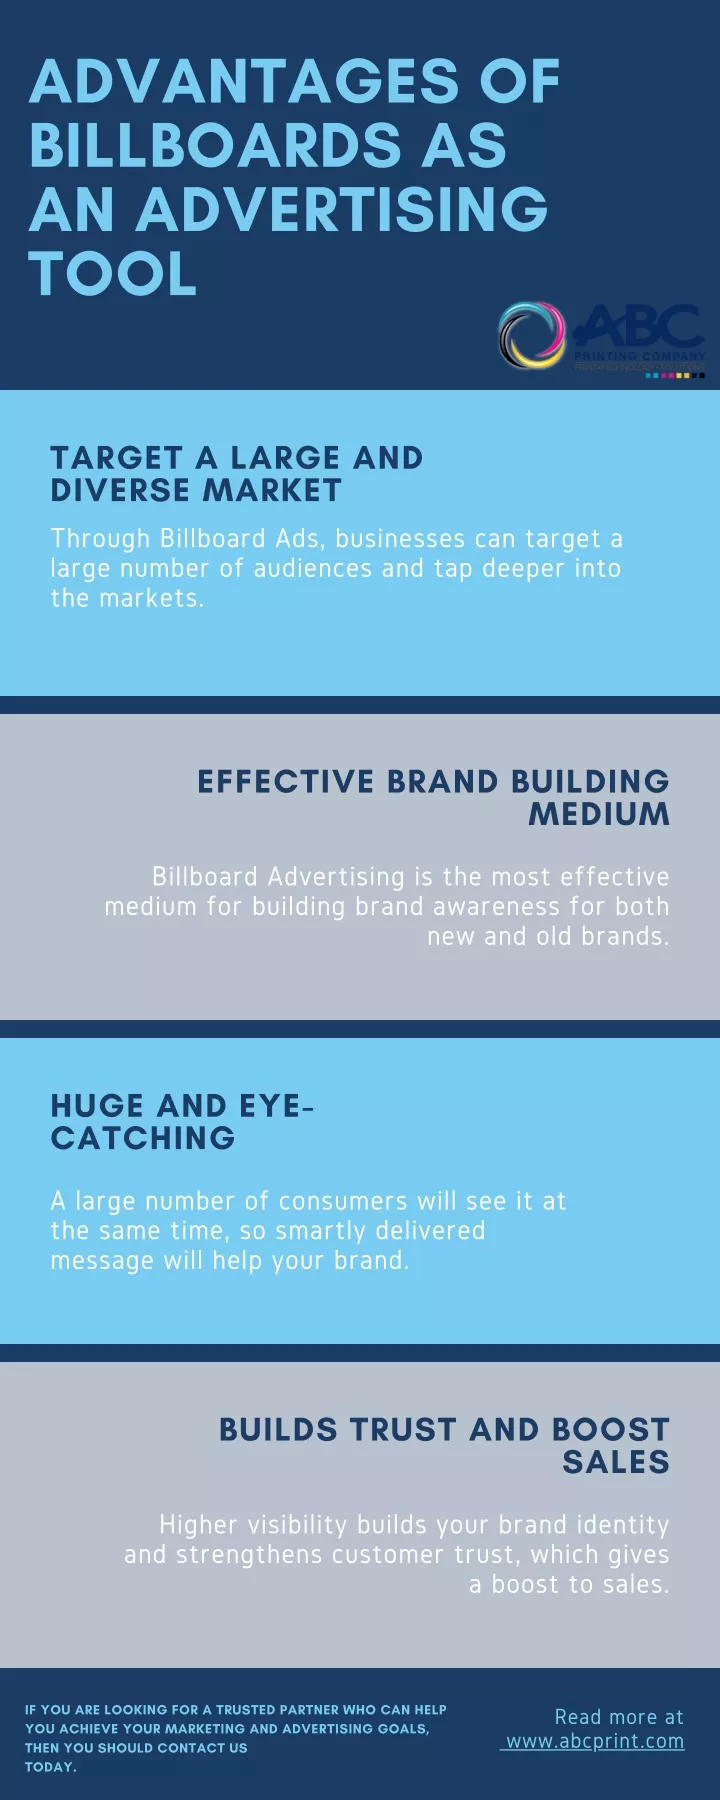 advantages of billboards as an advertising tool